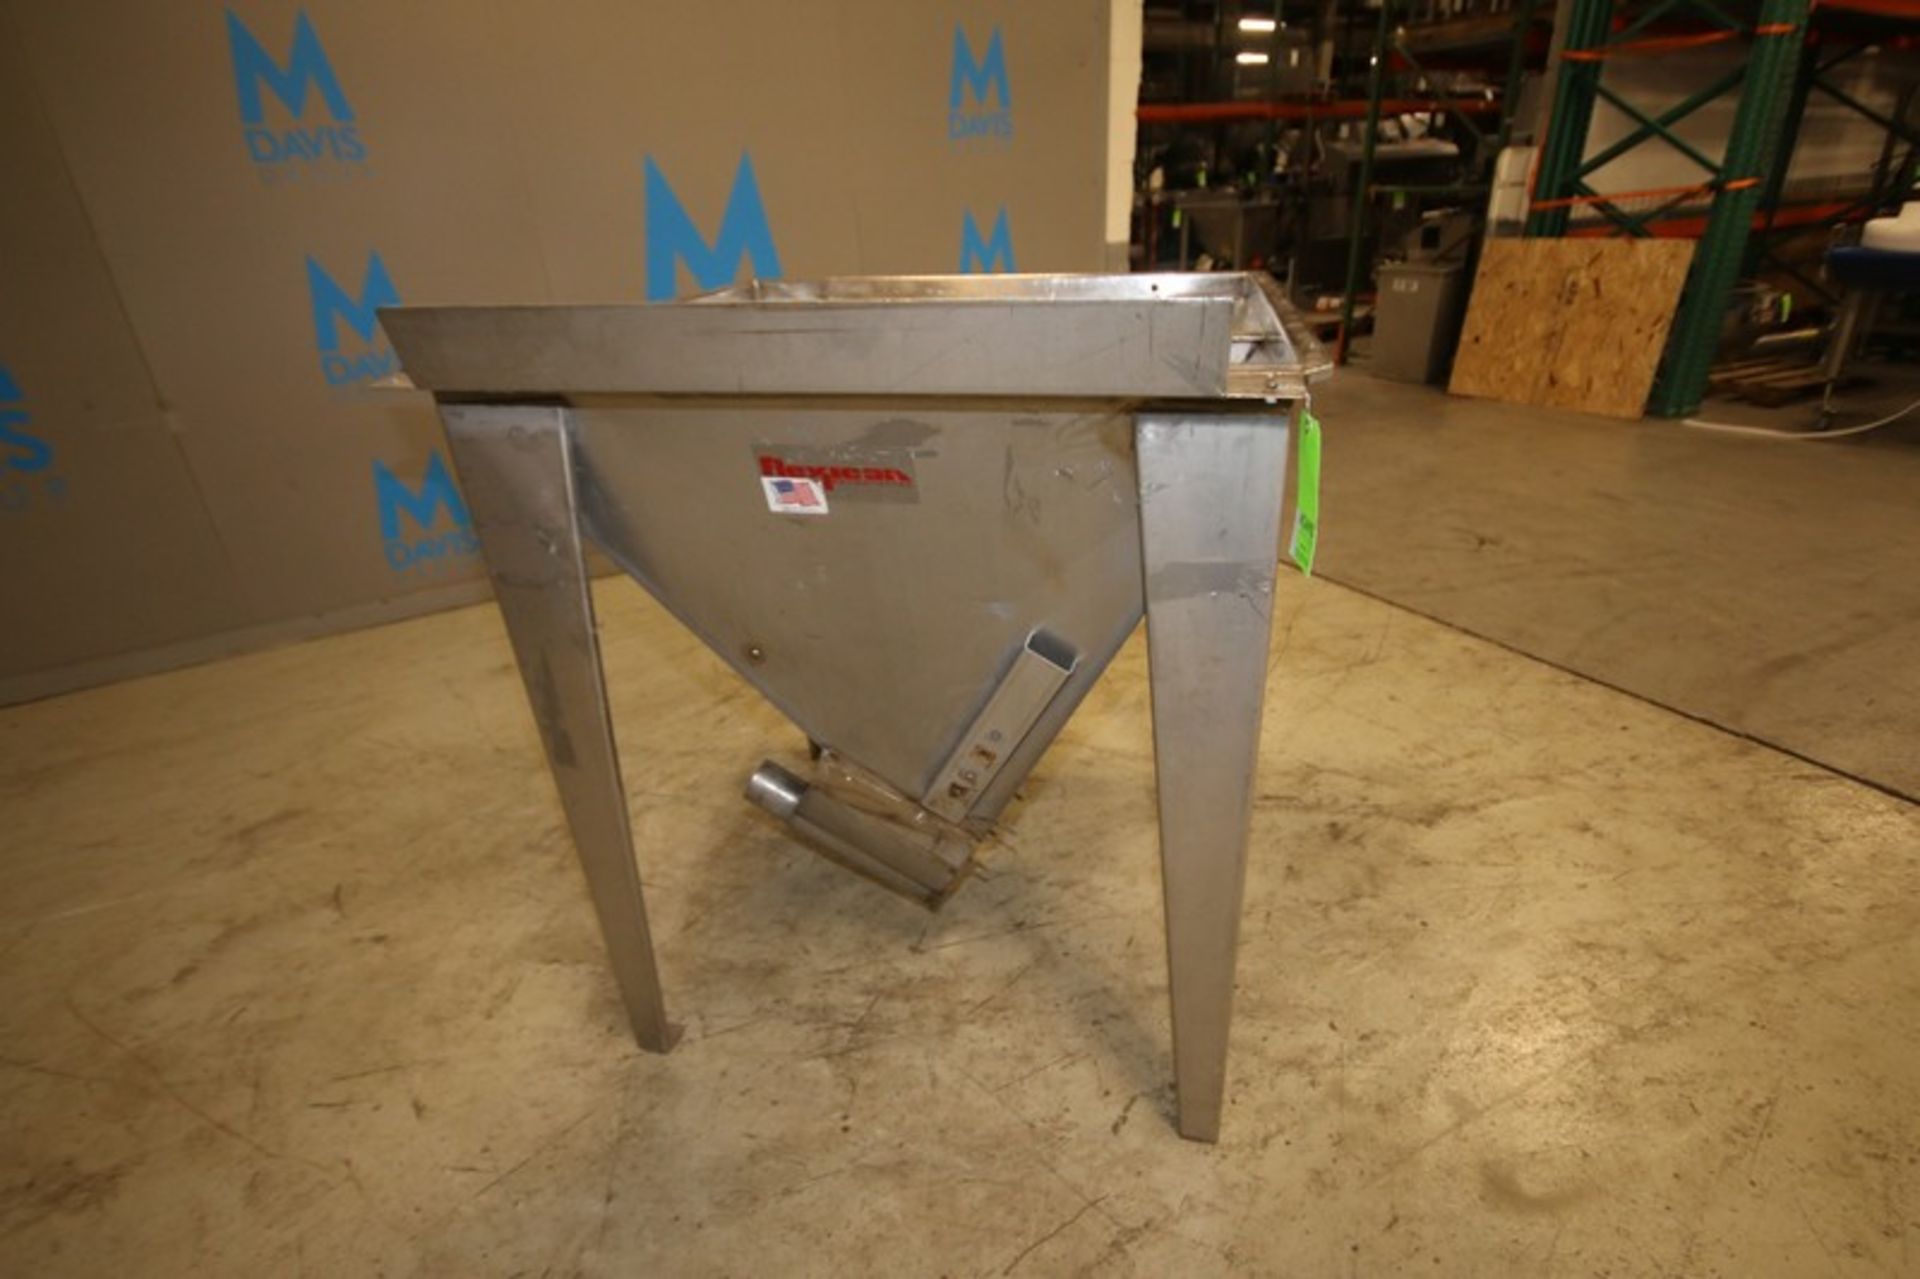 Flexicon 42" x 42" x 48" H S/S Feed Hopper with Dual 3.5" Connections (INV#100081) (Located @ the - Image 3 of 5